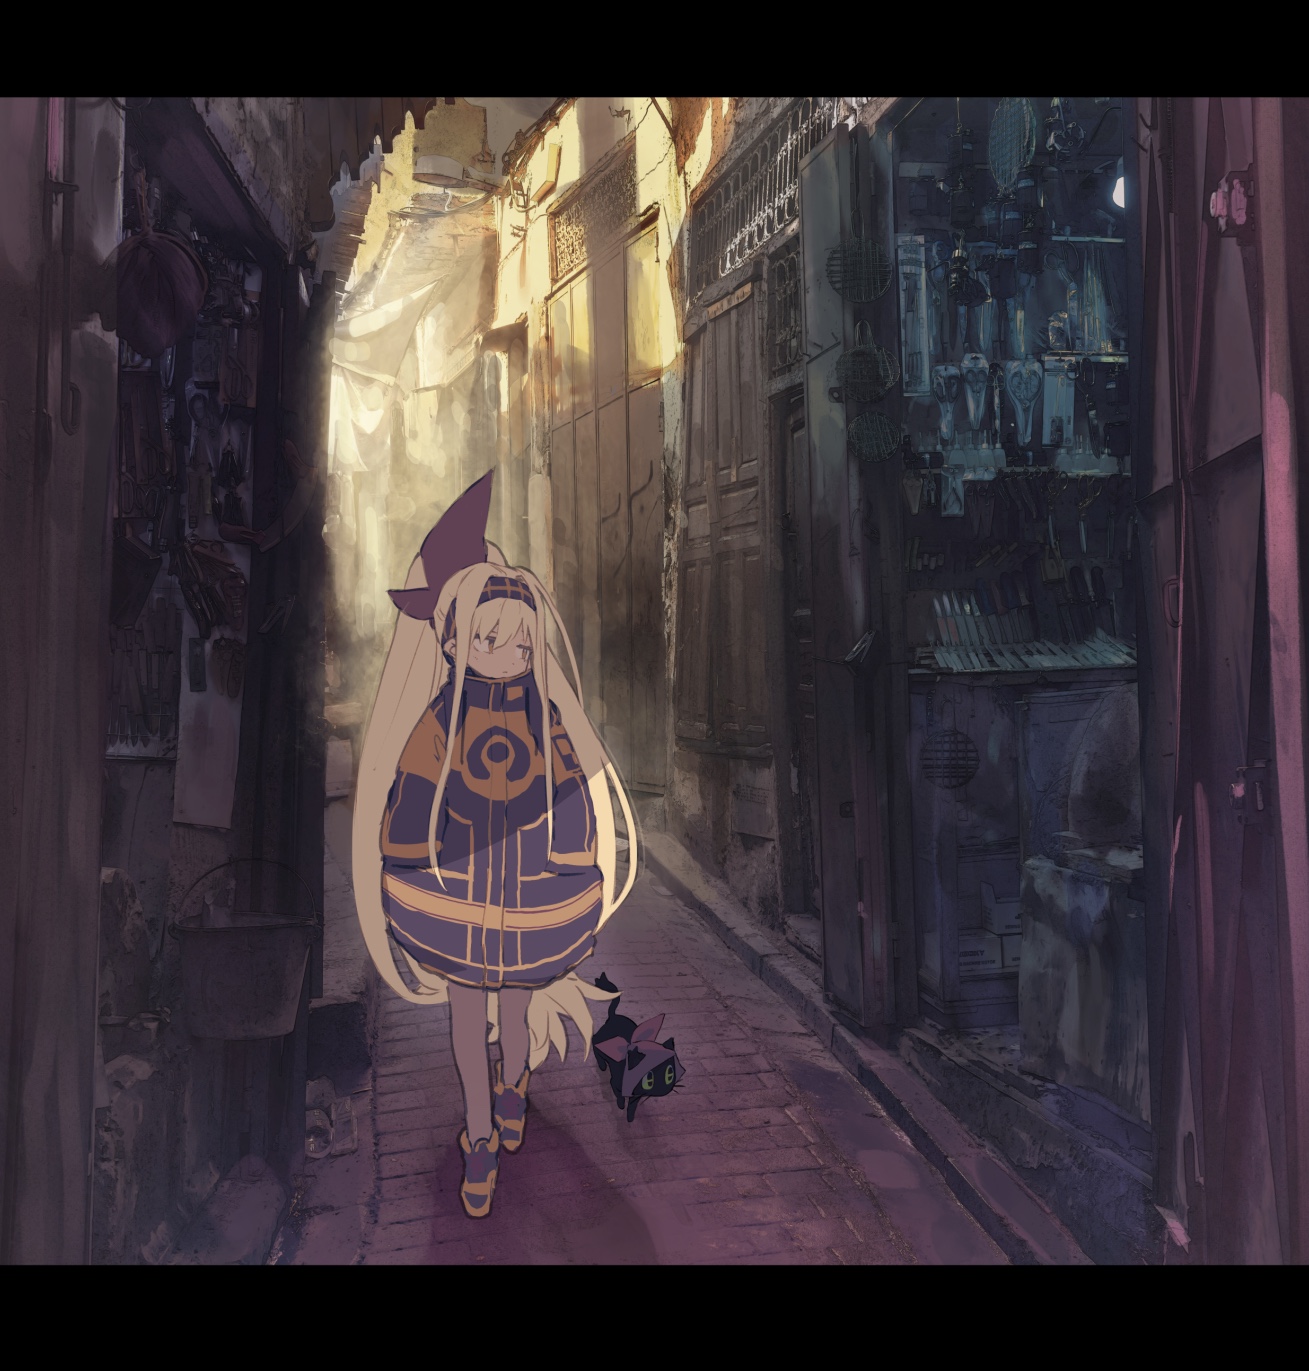 Anime 1309x1371 anime anime girls Hyocoro blonde long hair cats original characters alleyway concept art